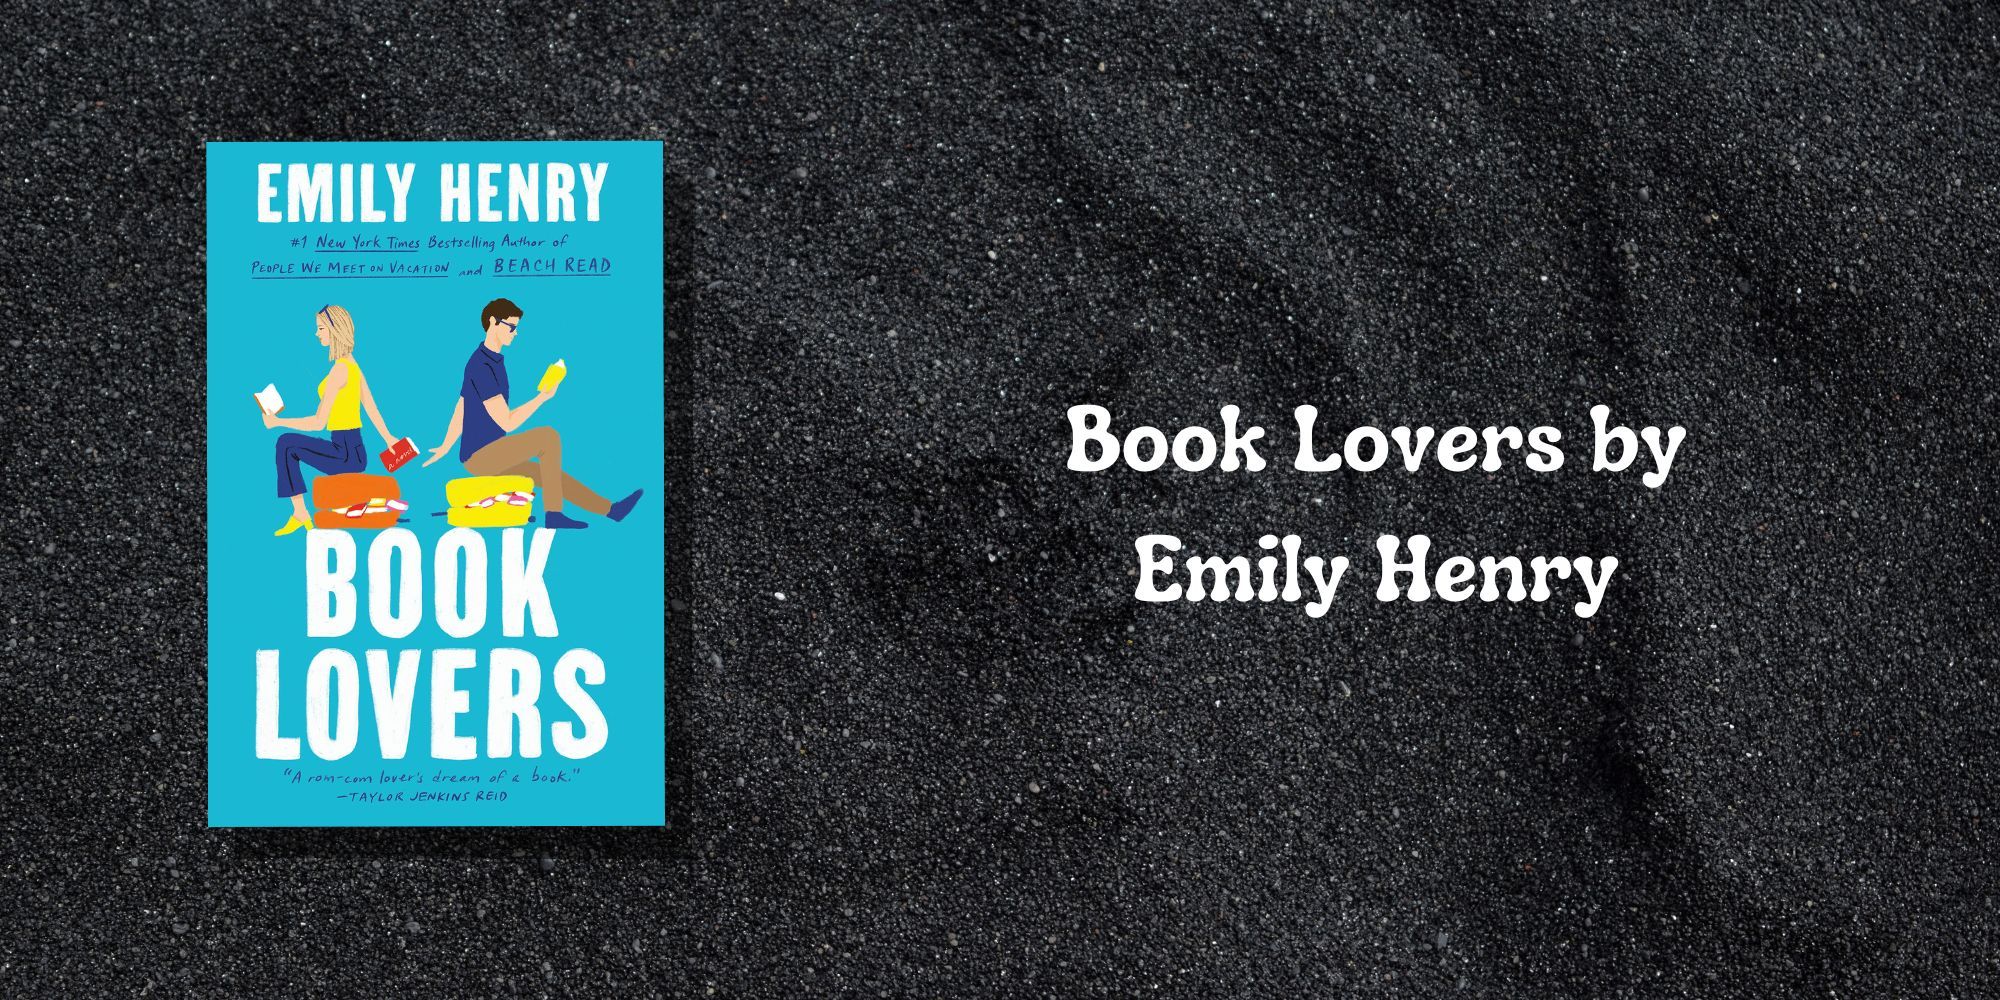 The Cover Of Book Lovers by Emily Henry